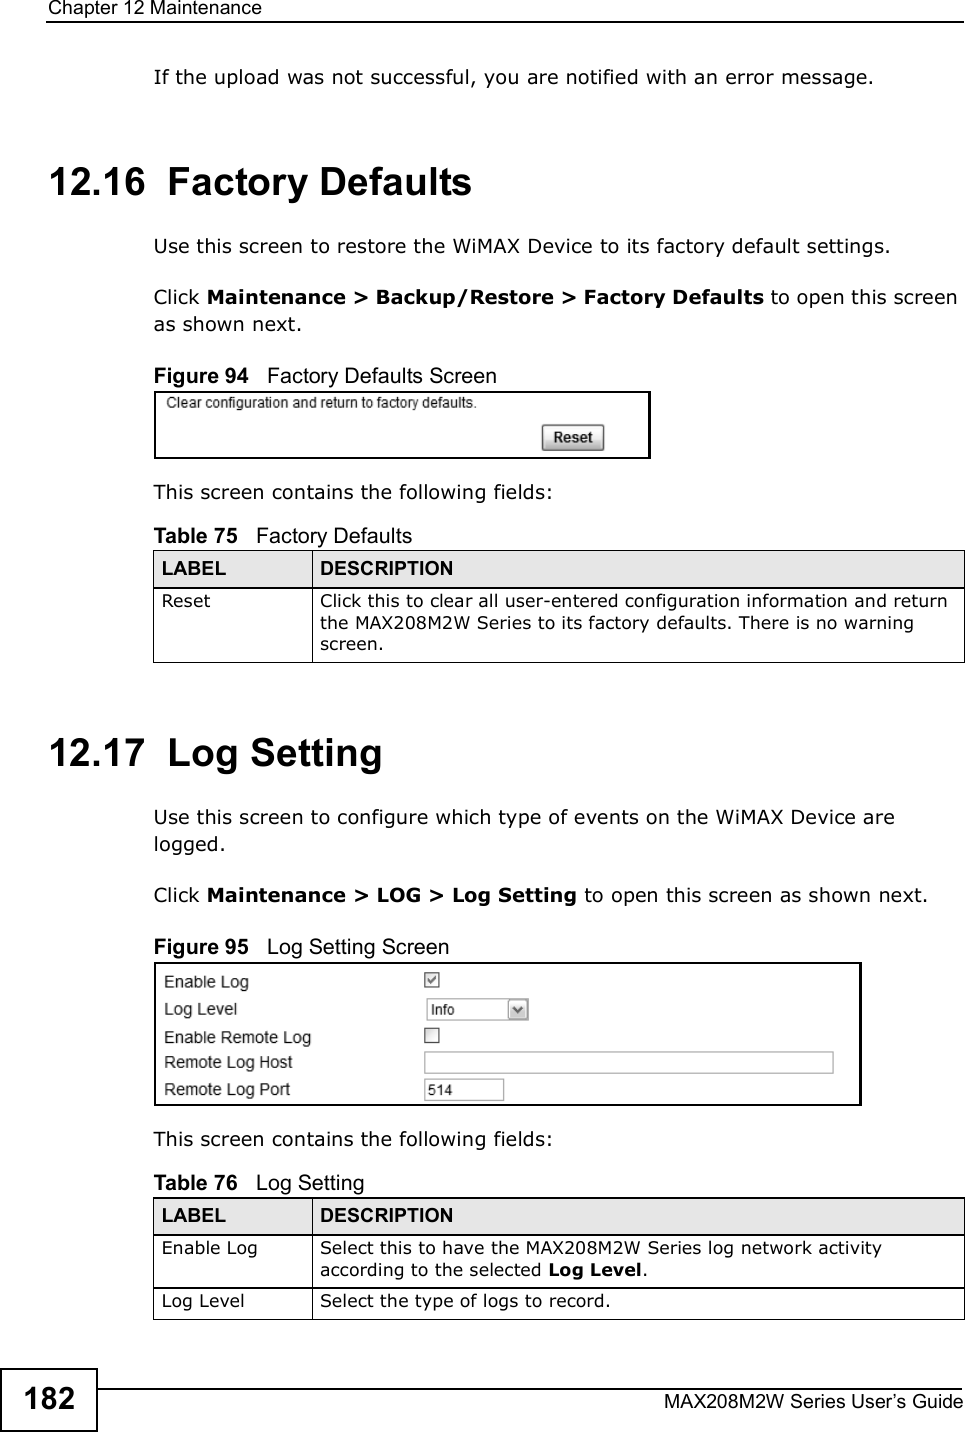 Chapter 12MaintenanceMAX208M2W Series User s Guide182If the upload was not successful, you are notified with an error message.12.16  Factory DefaultsUse this screen to restore the WiMAX Device to its factory default settings.Click Maintenance &gt; Backup/Restore &gt; Factory Defaults to open this screen as shown next.Figure 94   Factory Defaults ScreenThis screen contains the following fields:12.17  Log SettingUse this screen to configure which type of events on the WiMAX Device are logged.Click Maintenance &gt; LOG &gt; Log Setting to open this screen as shown next.Figure 95   Log Setting ScreenThis screen contains the following fields:Table 75   Factory DefaultsLABEL DESCRIPTIONReset Click this to clear all user-entered configuration information and return the MAX208M2W Series to its factory defaults. There is no warning screen.Table 76   Log SettingLABEL DESCRIPTIONEnable LogSelect this to have the MAX208M2W Series log network activity according to the selected Log Level.Log LevelSelect the type of logs to record.